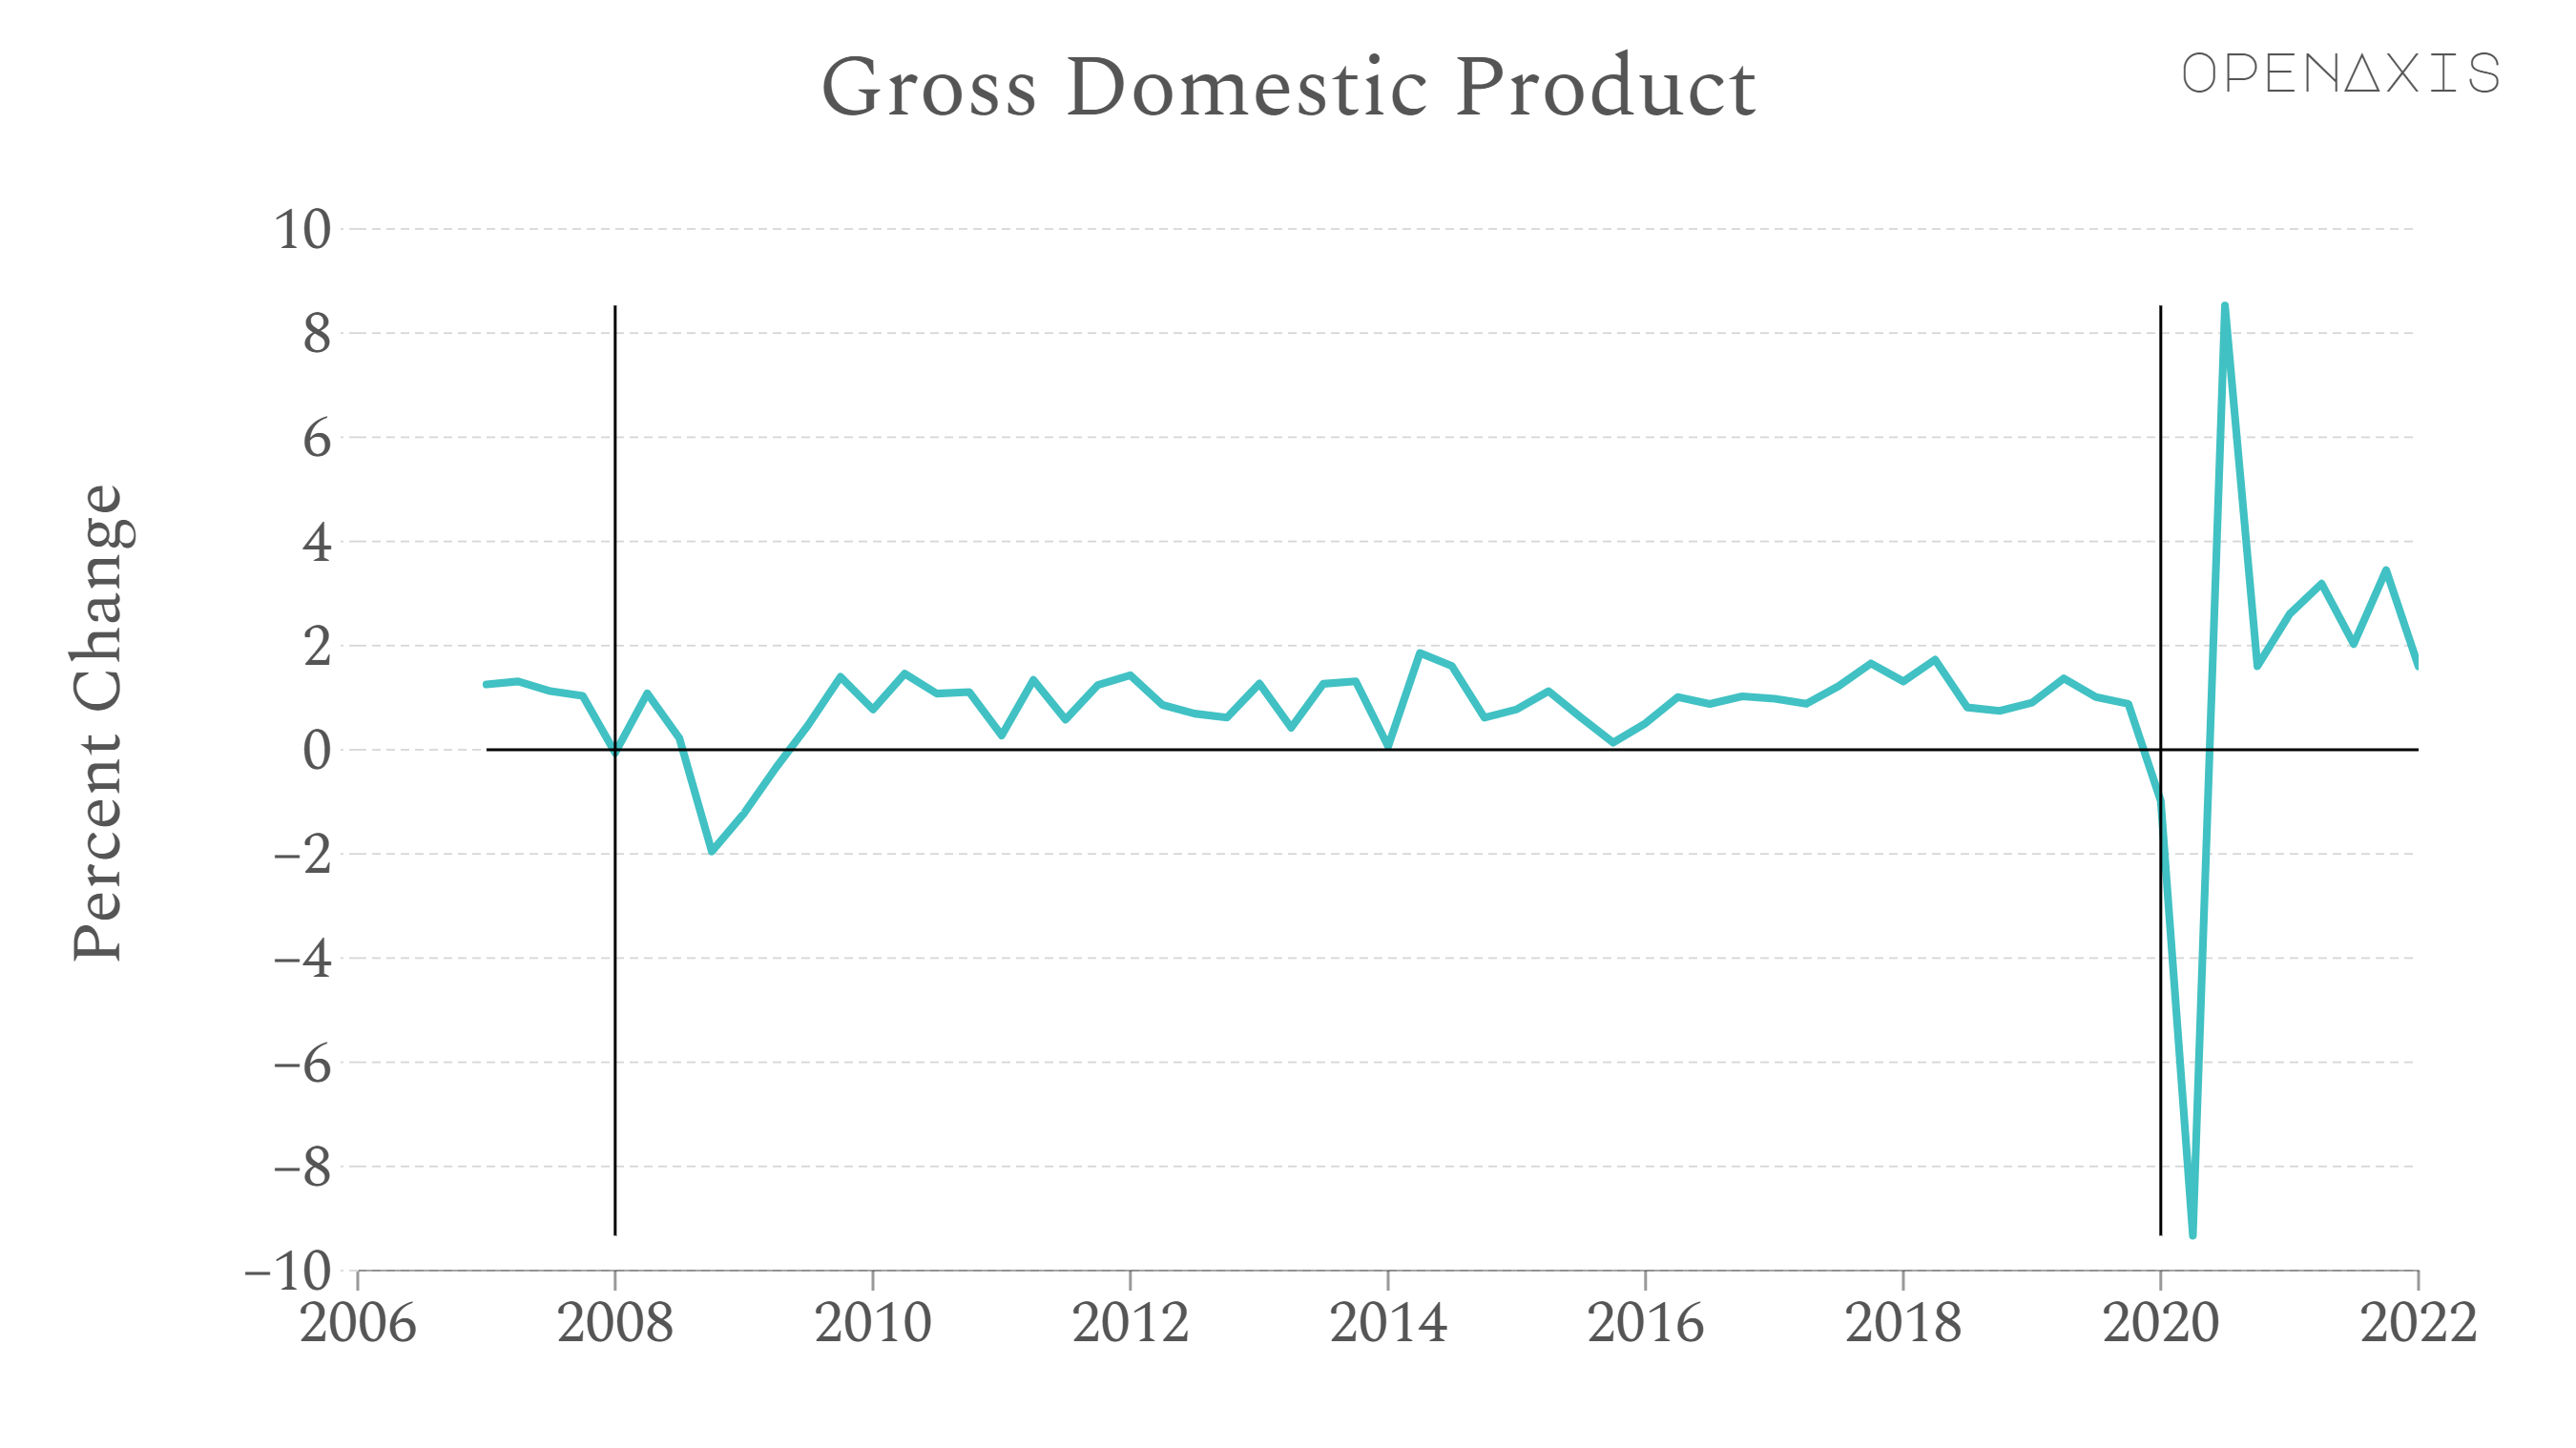 <p>With second-quarter GDP data due out Thursday, the question of whether the economy is in recession will be on everyone’s mind.</p><p><br /></p><p>The economy stands at least a fair a chance of hitting the rule-of-thumb recession definition of two consecutive quarters with negative GDP readings.</p><p><br /></p><p>The last two recessions were in 2020 and 2008-2009, as annotated in the chart above. </p><p><br /></p><p>Should inflation stay at high levels, that then will trigger the biggest recession catalyst of all, namely Federal Reserve interest rate hikes.</p><p><br /></p><p>Treasury Secretary Janet Yellen said “we just don’t have” conditions consistent with a recession.</p><p><br /></p><p><span data-index="0" data-denotation-char data-id="0" data-value="&lt;a href=&quot;/search?q=%23economy&quot; target=_self&gt;#economy" data-link="/search?q=%23economy">﻿<span contenteditable="false"><span></span><a href="/search?q=%23economy" target="_self">#economy</a></span>﻿</span> <span data-index="0" data-denotation-char data-id="0" data-value="&lt;a href=&quot;/search?q=%23recession&quot; target=_self&gt;#recession" data-link="/search?q=%23recession">﻿<span contenteditable="false"><span></span><a href="/search?q=%23recession" target="_self">#recession</a></span>﻿</span> <span data-index="0" data-denotation-char data-id="0" data-value="&lt;a href=&quot;/search?q=%23inflation&quot; target=_self&gt;#inflation" data-link="/search?q=%23inflation">﻿<span contenteditable="false"><span></span><a href="/search?q=%23inflation" target="_self">#inflation</a></span>﻿</span> </p><p><br /></p><p>Source: <a href="/data/3996" target="_blank">U.S. Bureau of Economic Analysis</a></p><p><br /></p>